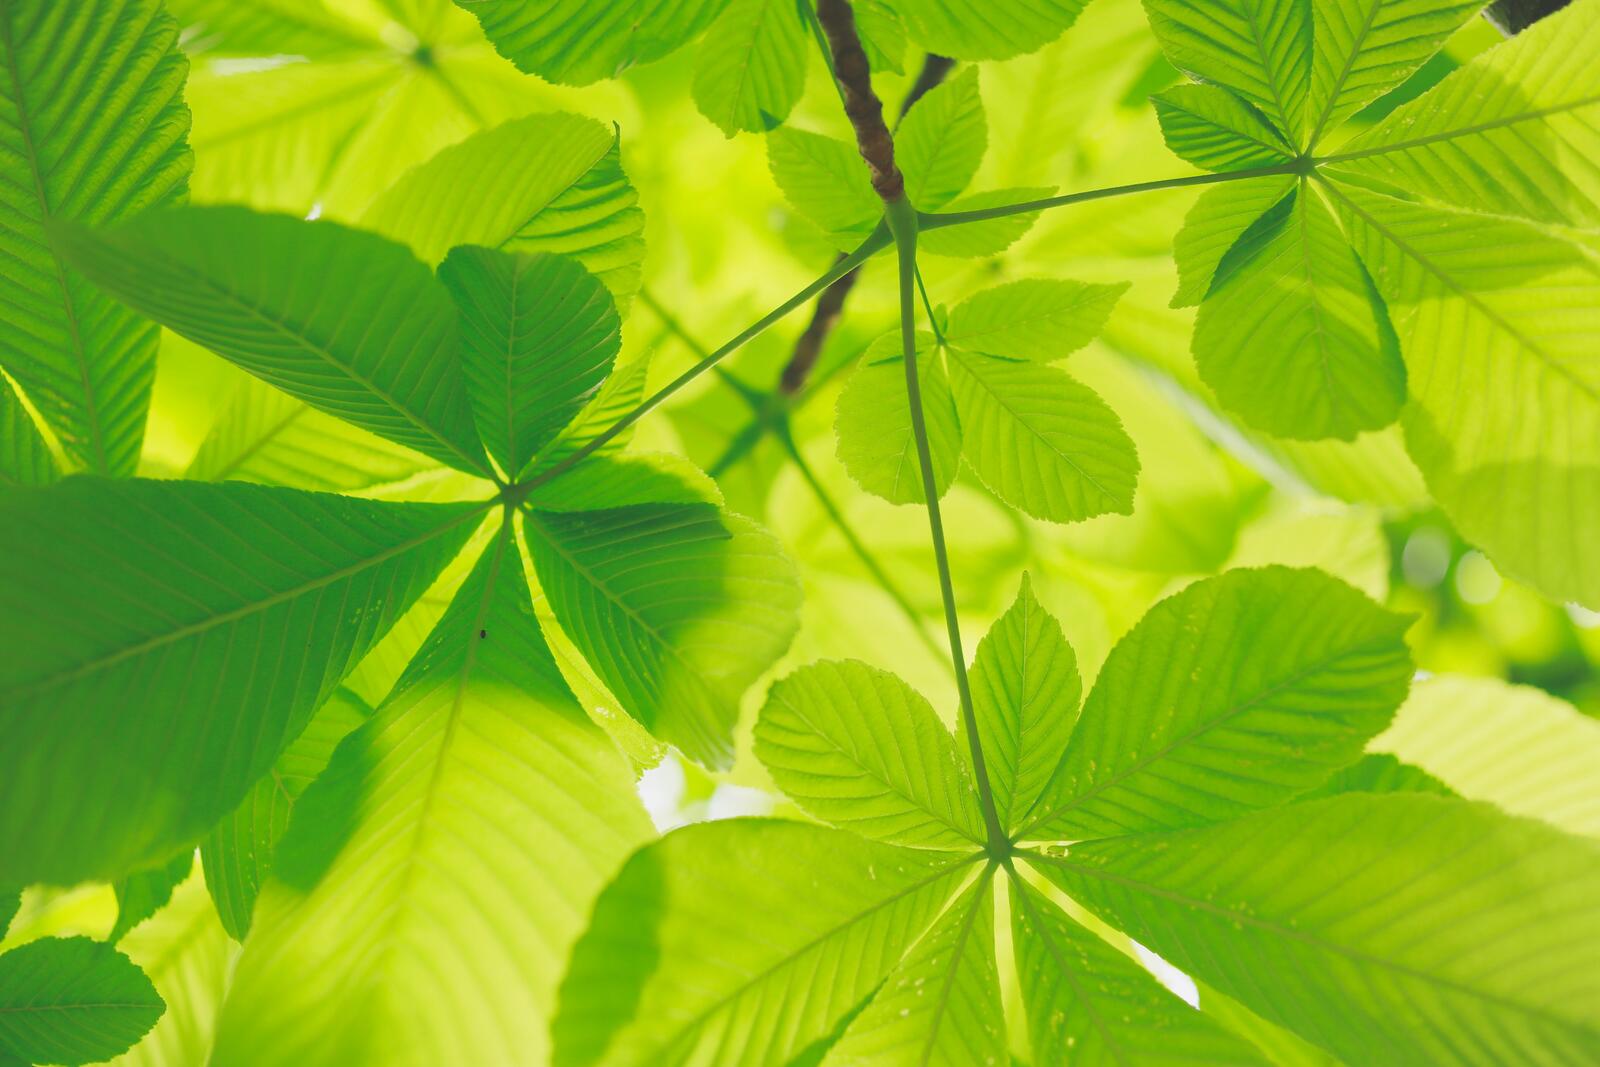 Wallpapers green leaves nature on the desktop